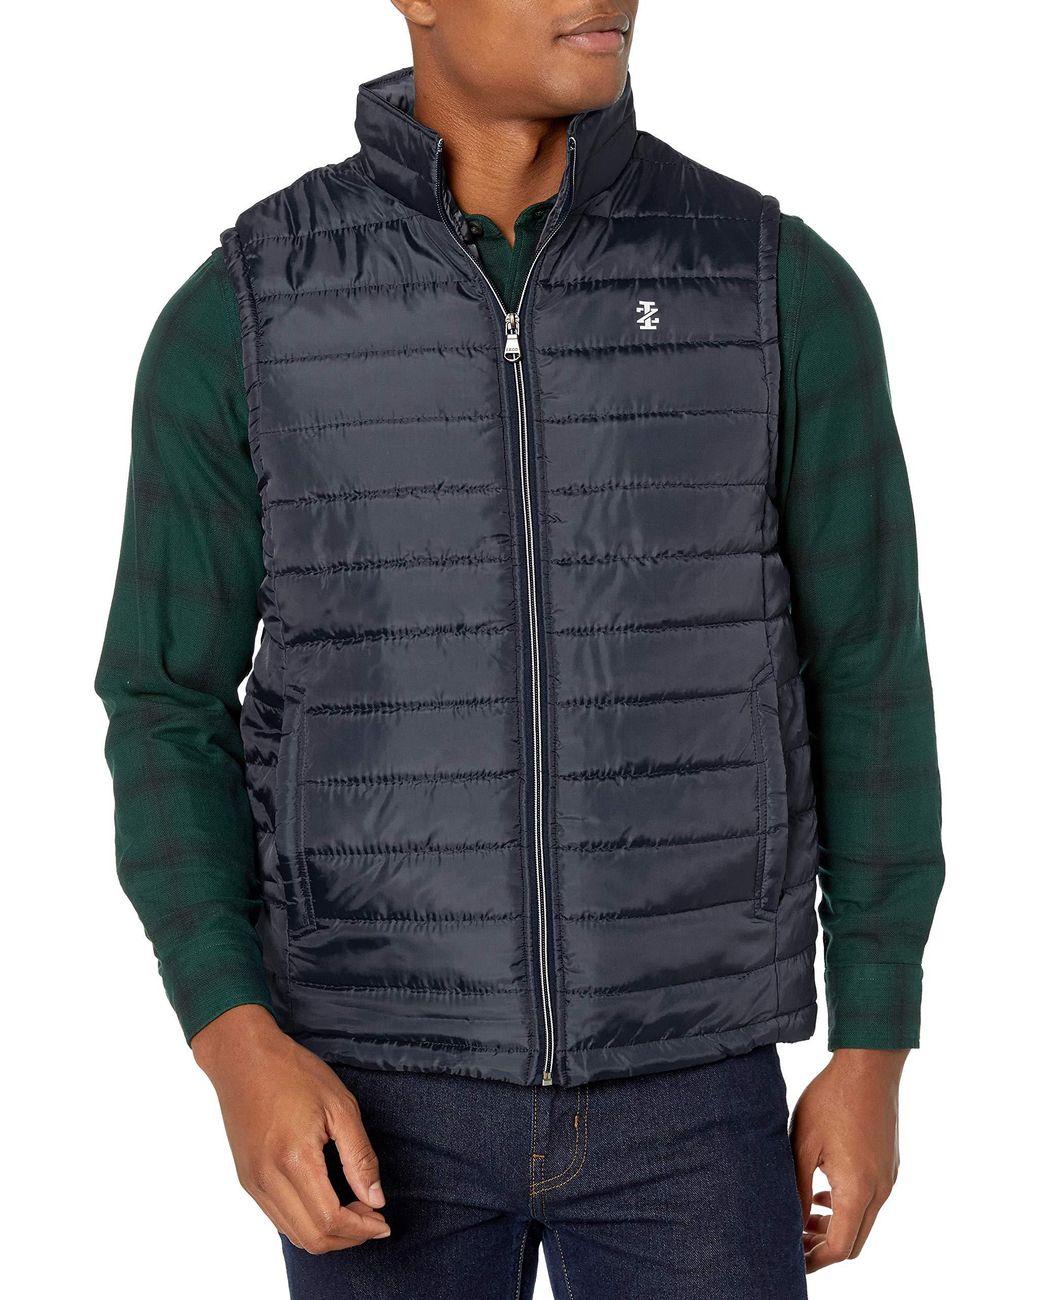 Izod Quilted Puffer Vest in Navy (Blue) for Men - Lyst